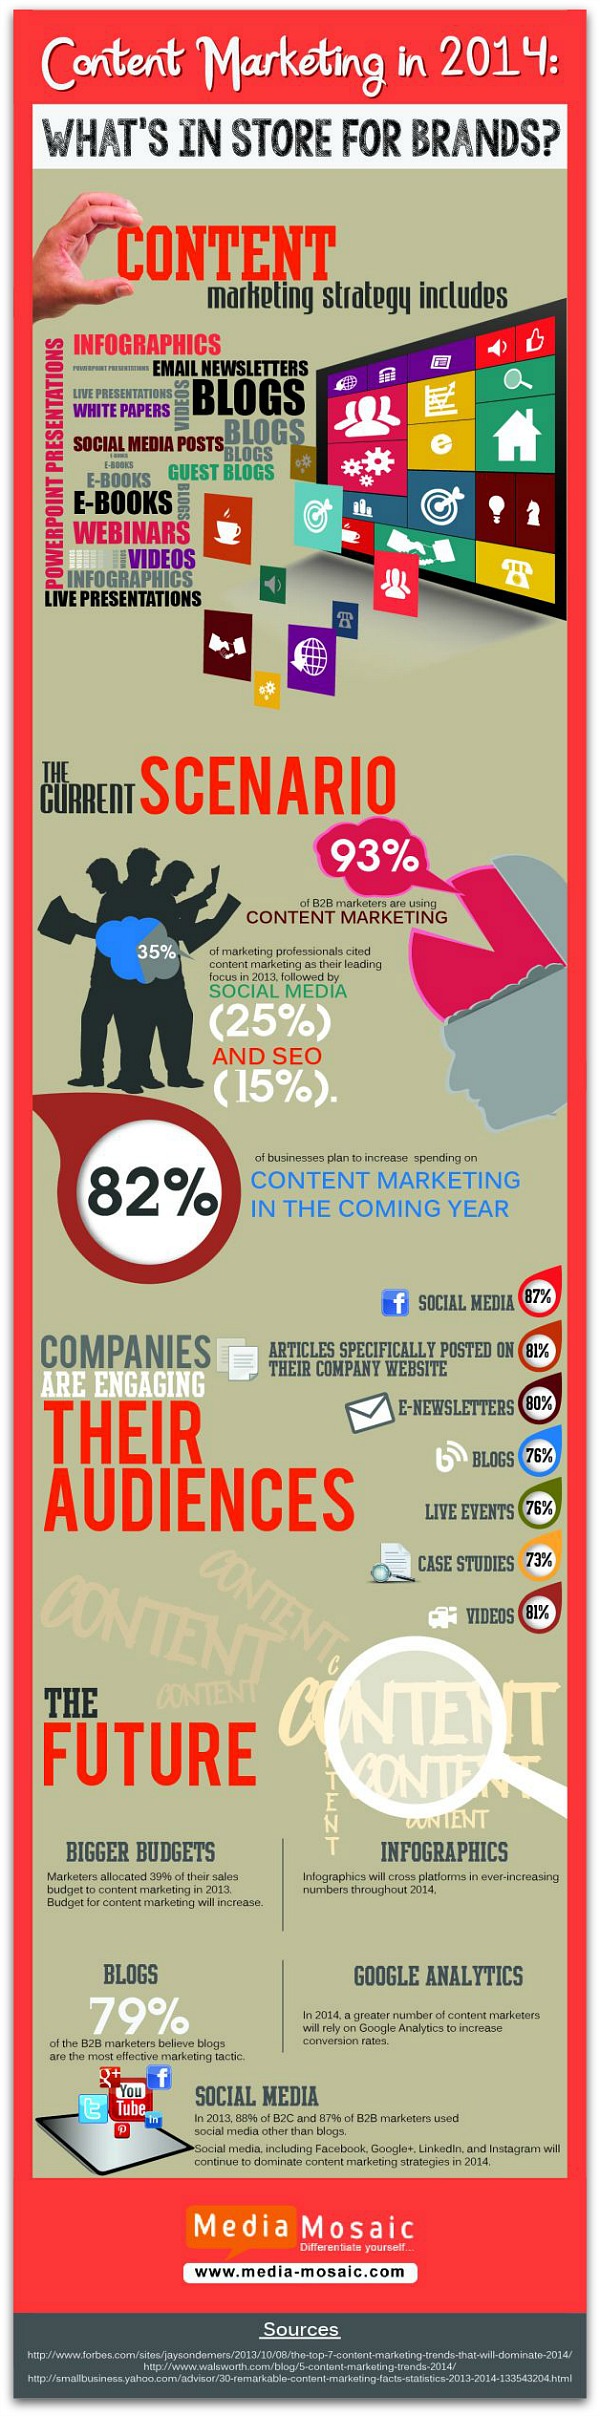 Future_of_Content_Marketing_2014_Infographic